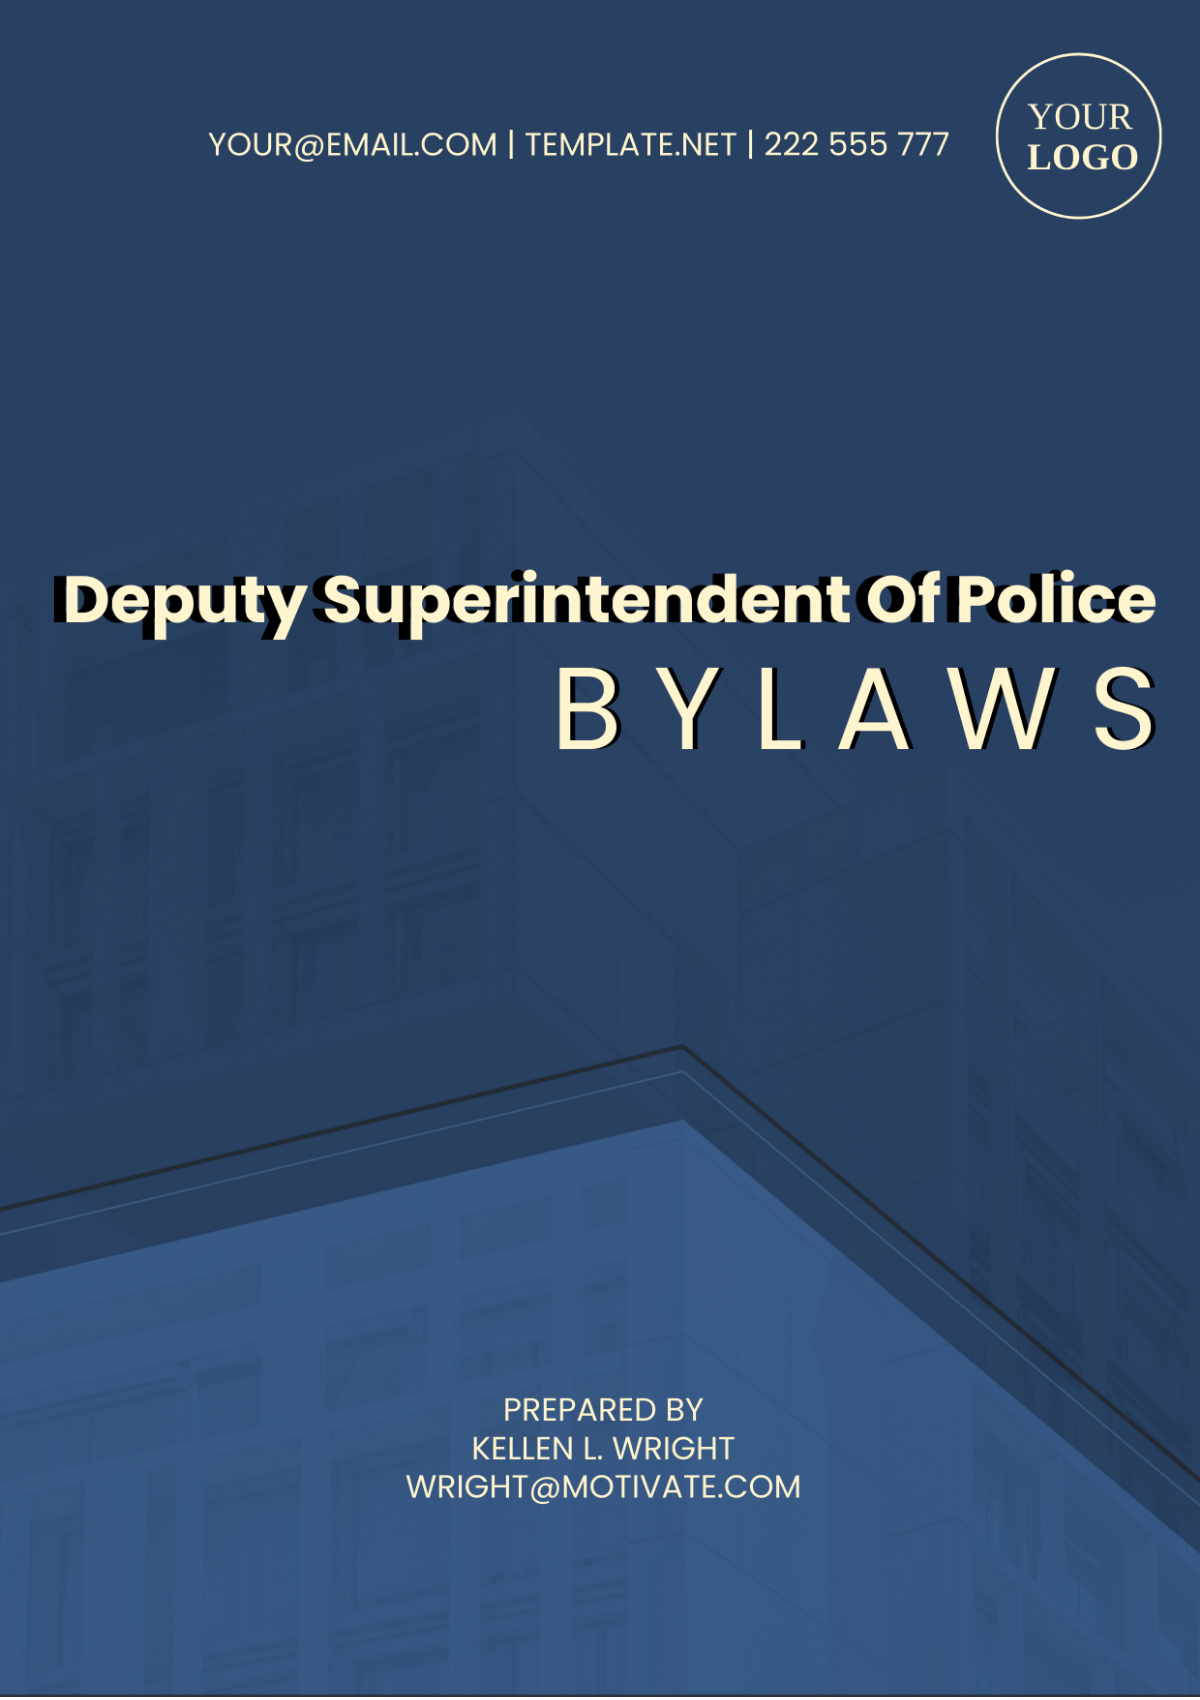 Dsp(Deputy Superintendent Of Police) Bylaws Template